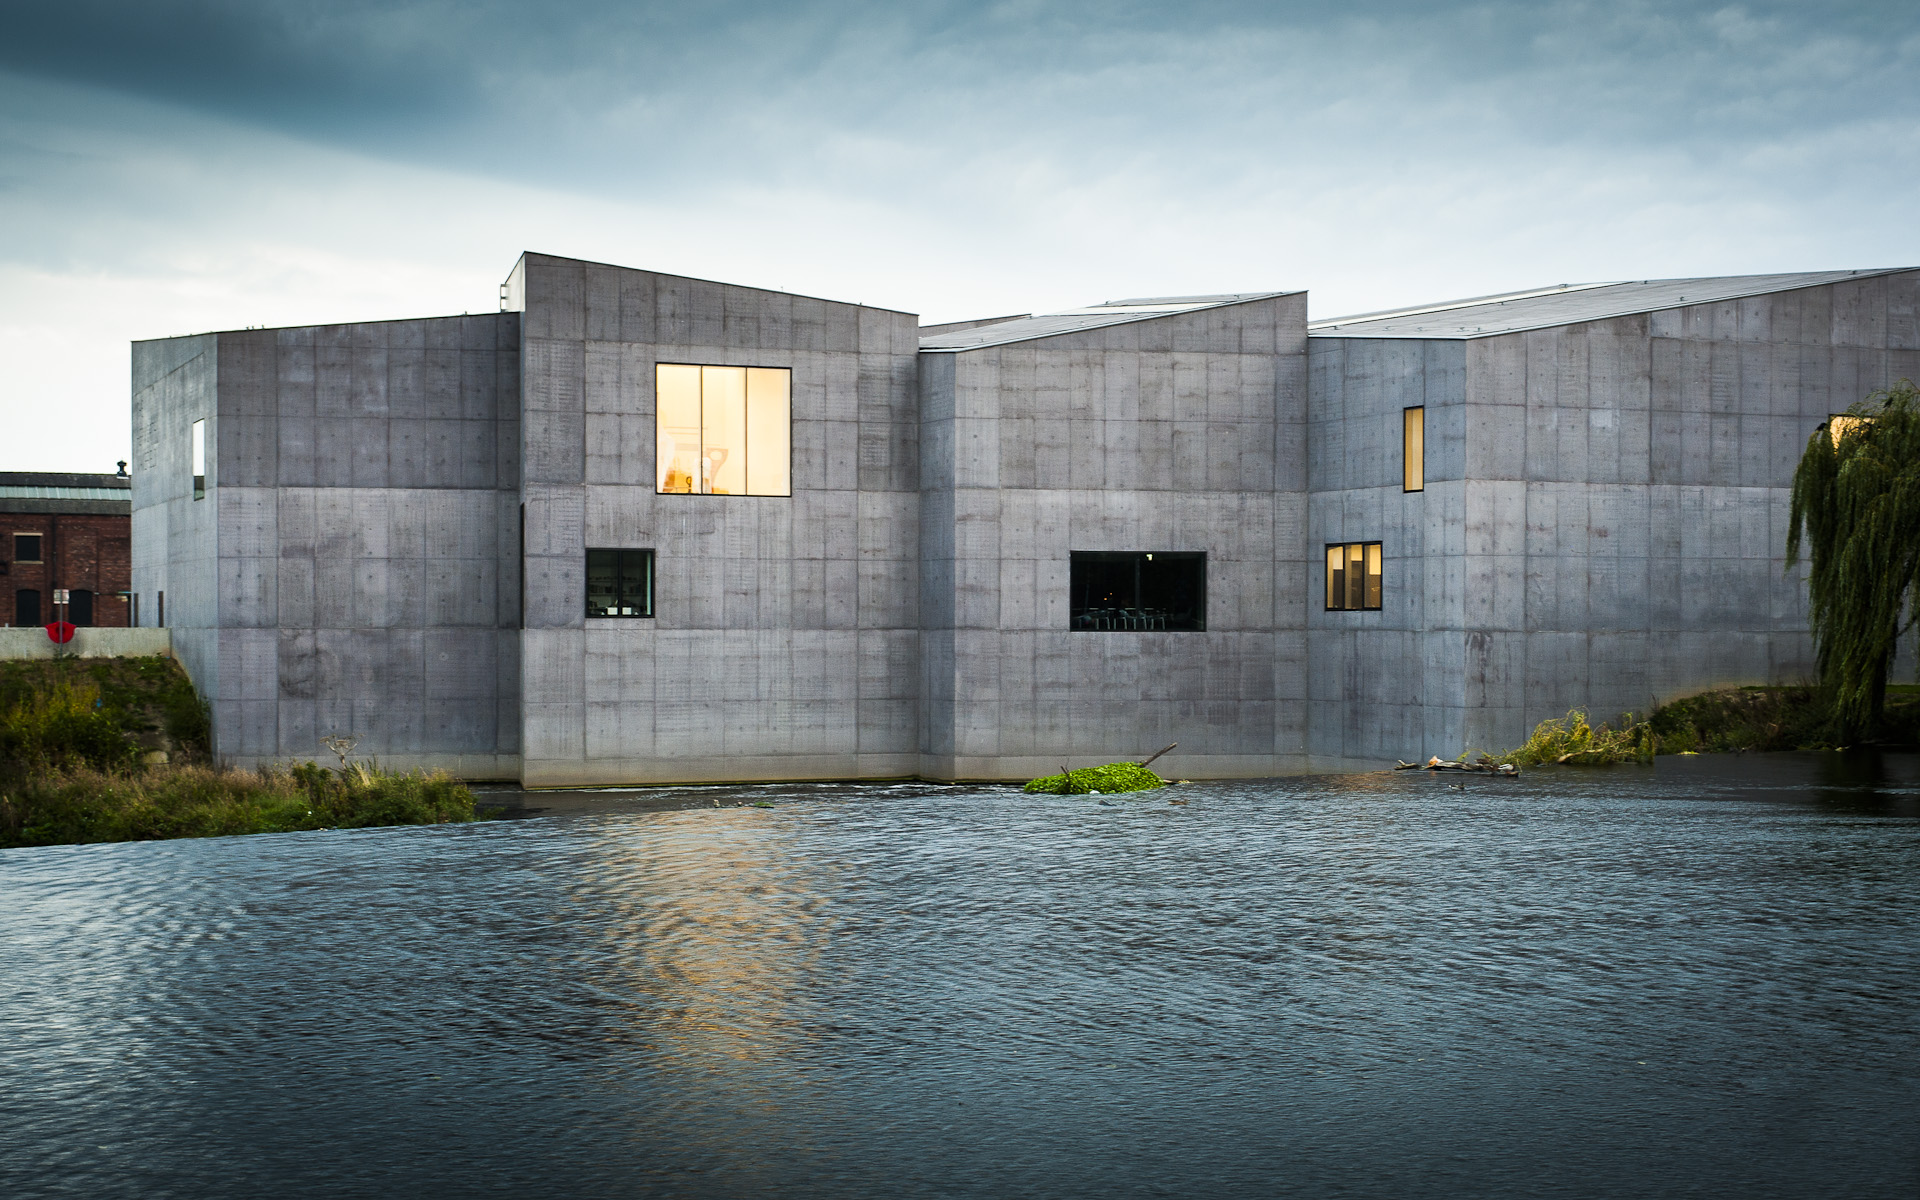 THE HEPWORTH, WAKEFIELD   |   David Chipperfield Architects